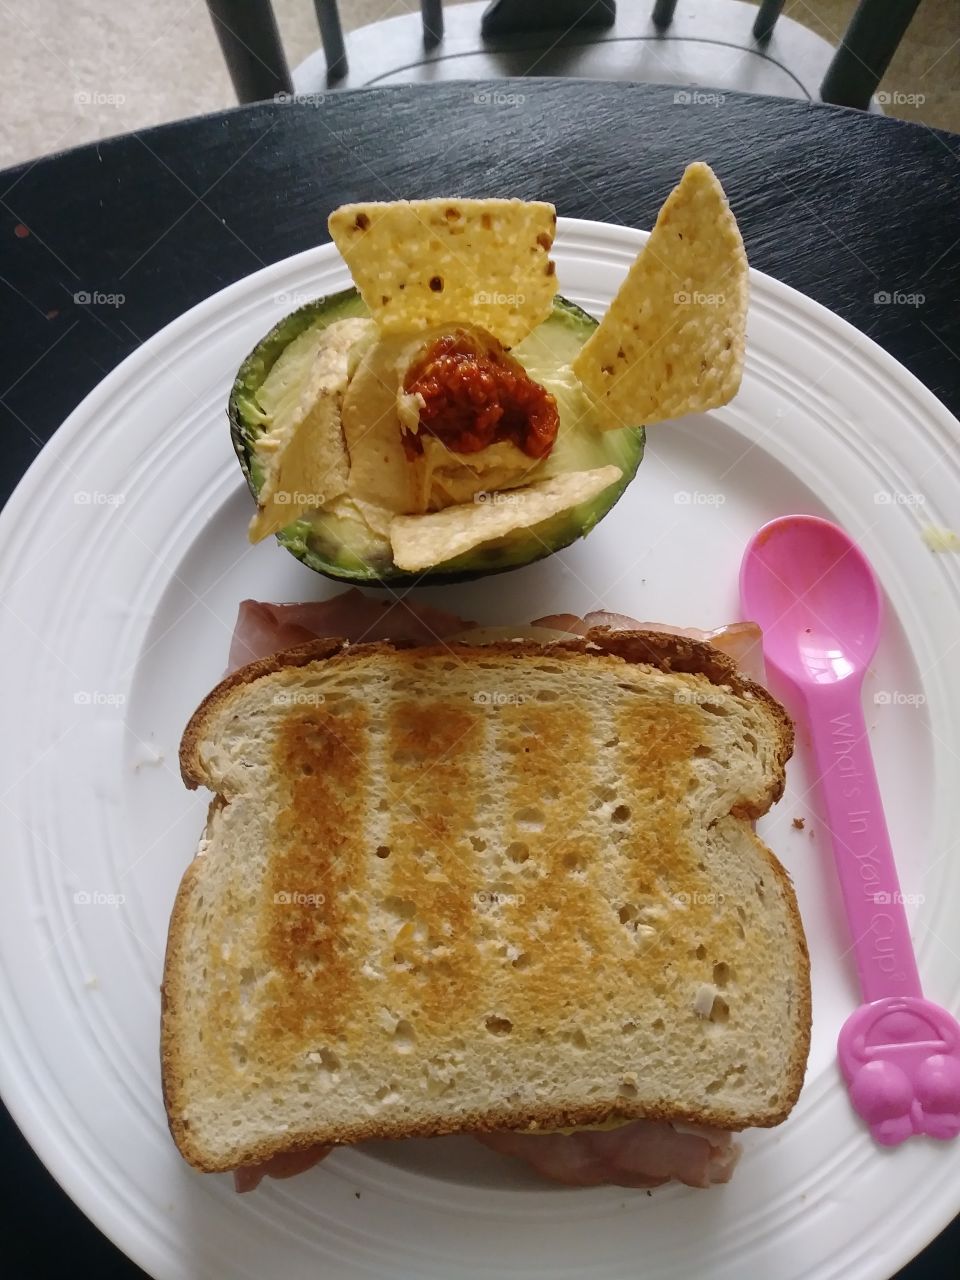 poop mb lunch of sandwich and avocado chips and hummus